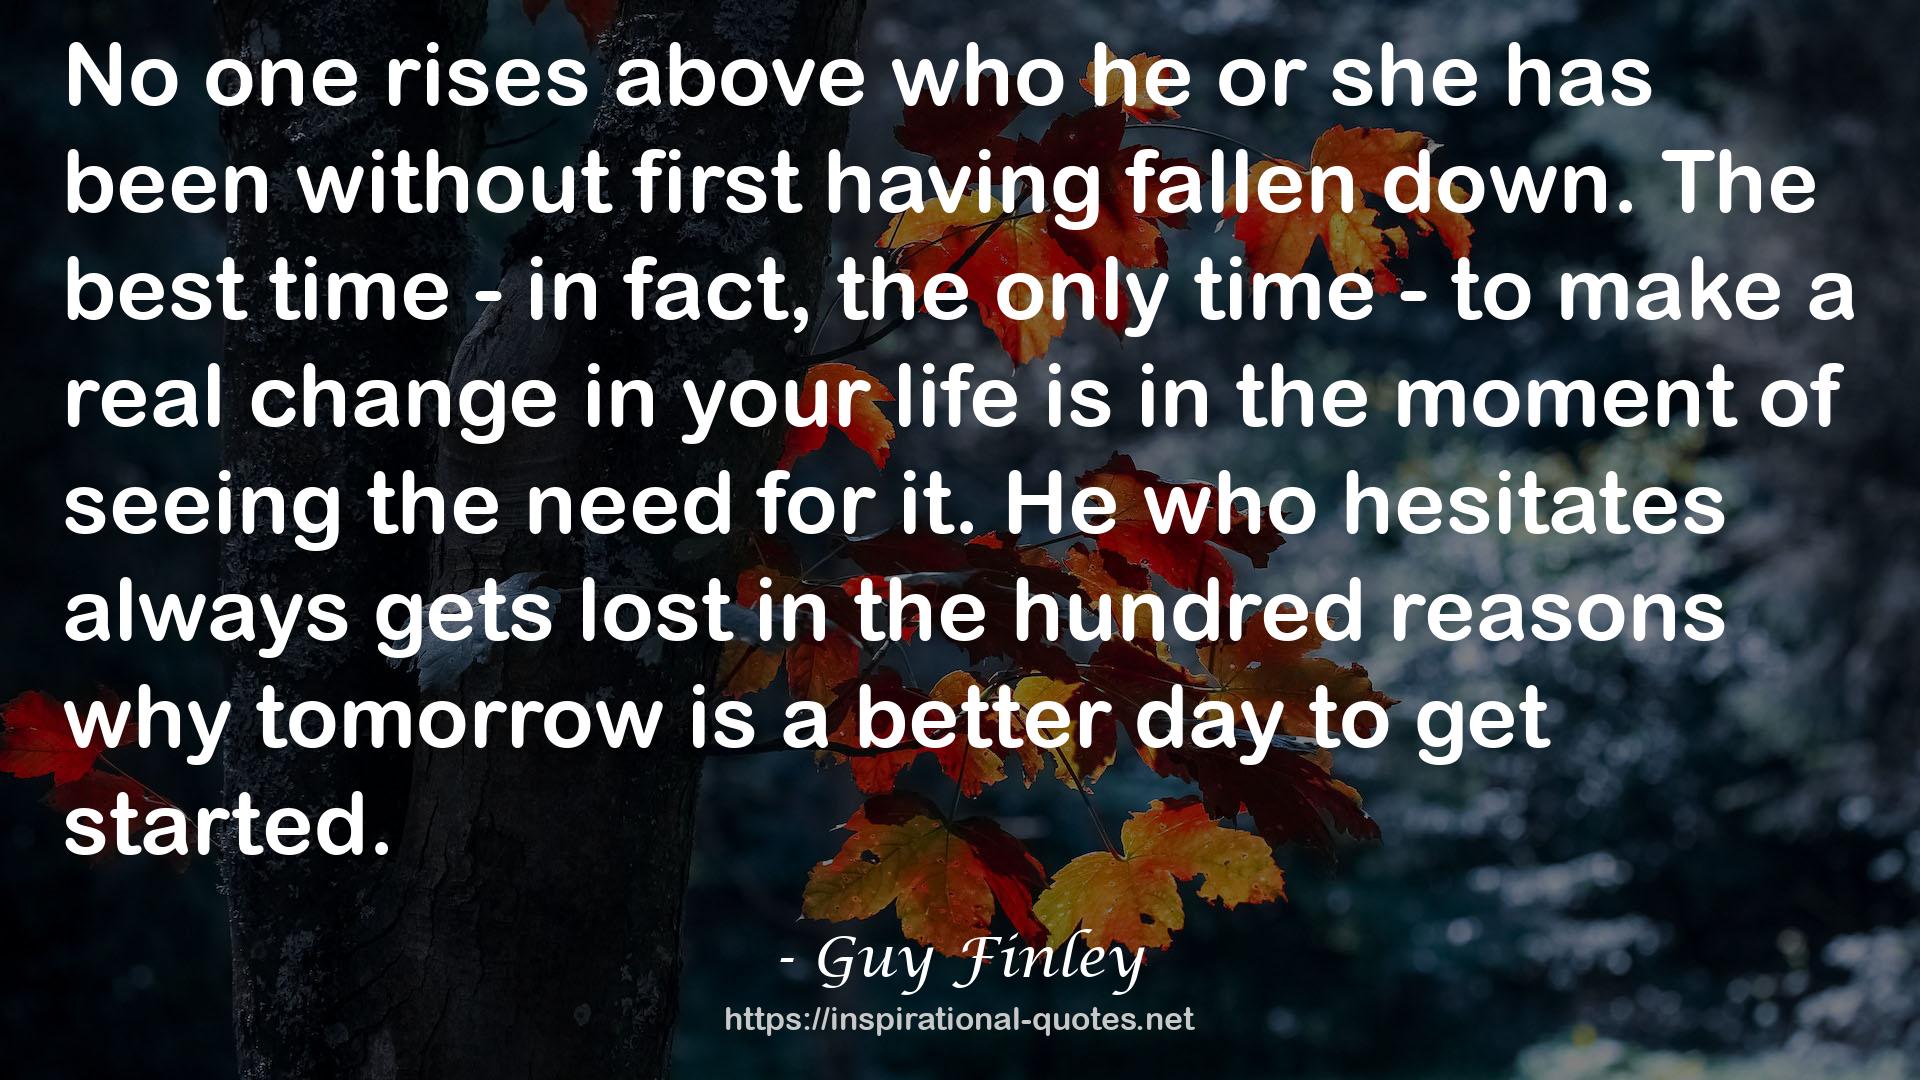 Guy Finley QUOTES